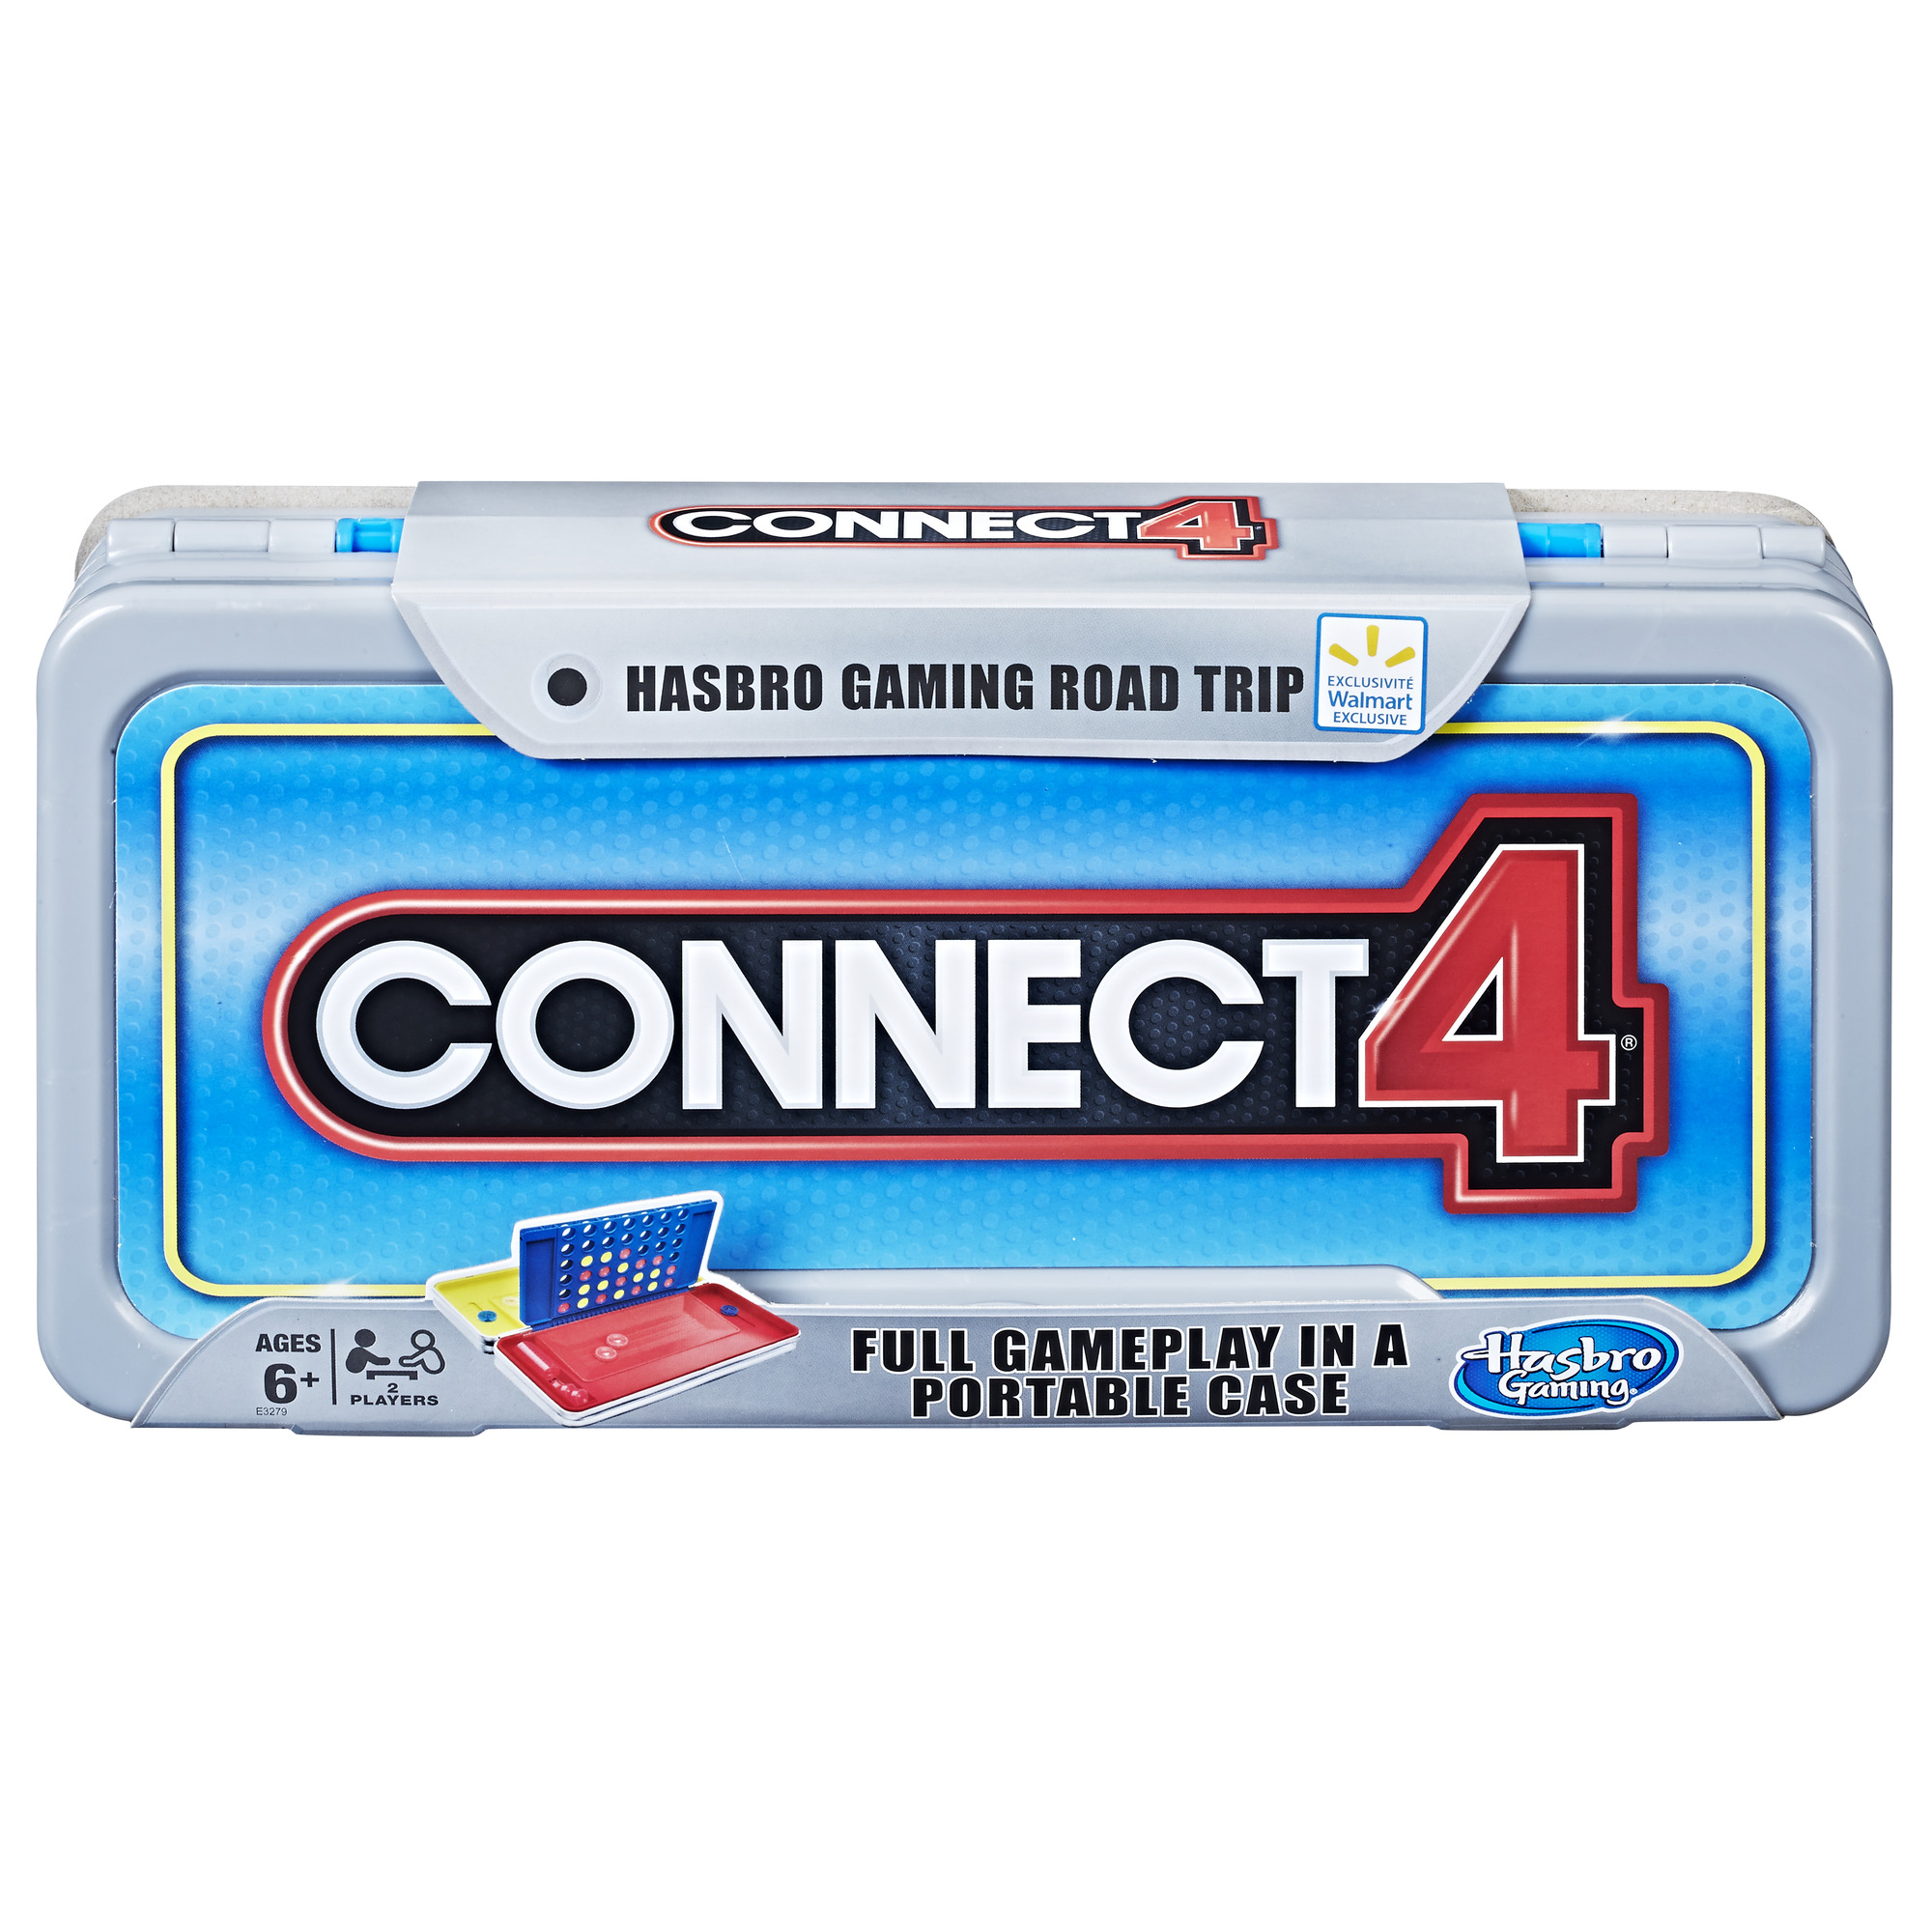 Hasbro Gaming Road Trip Series Connect 4 Board Game; Full Gameplay in Portable Case - image 1 of 2